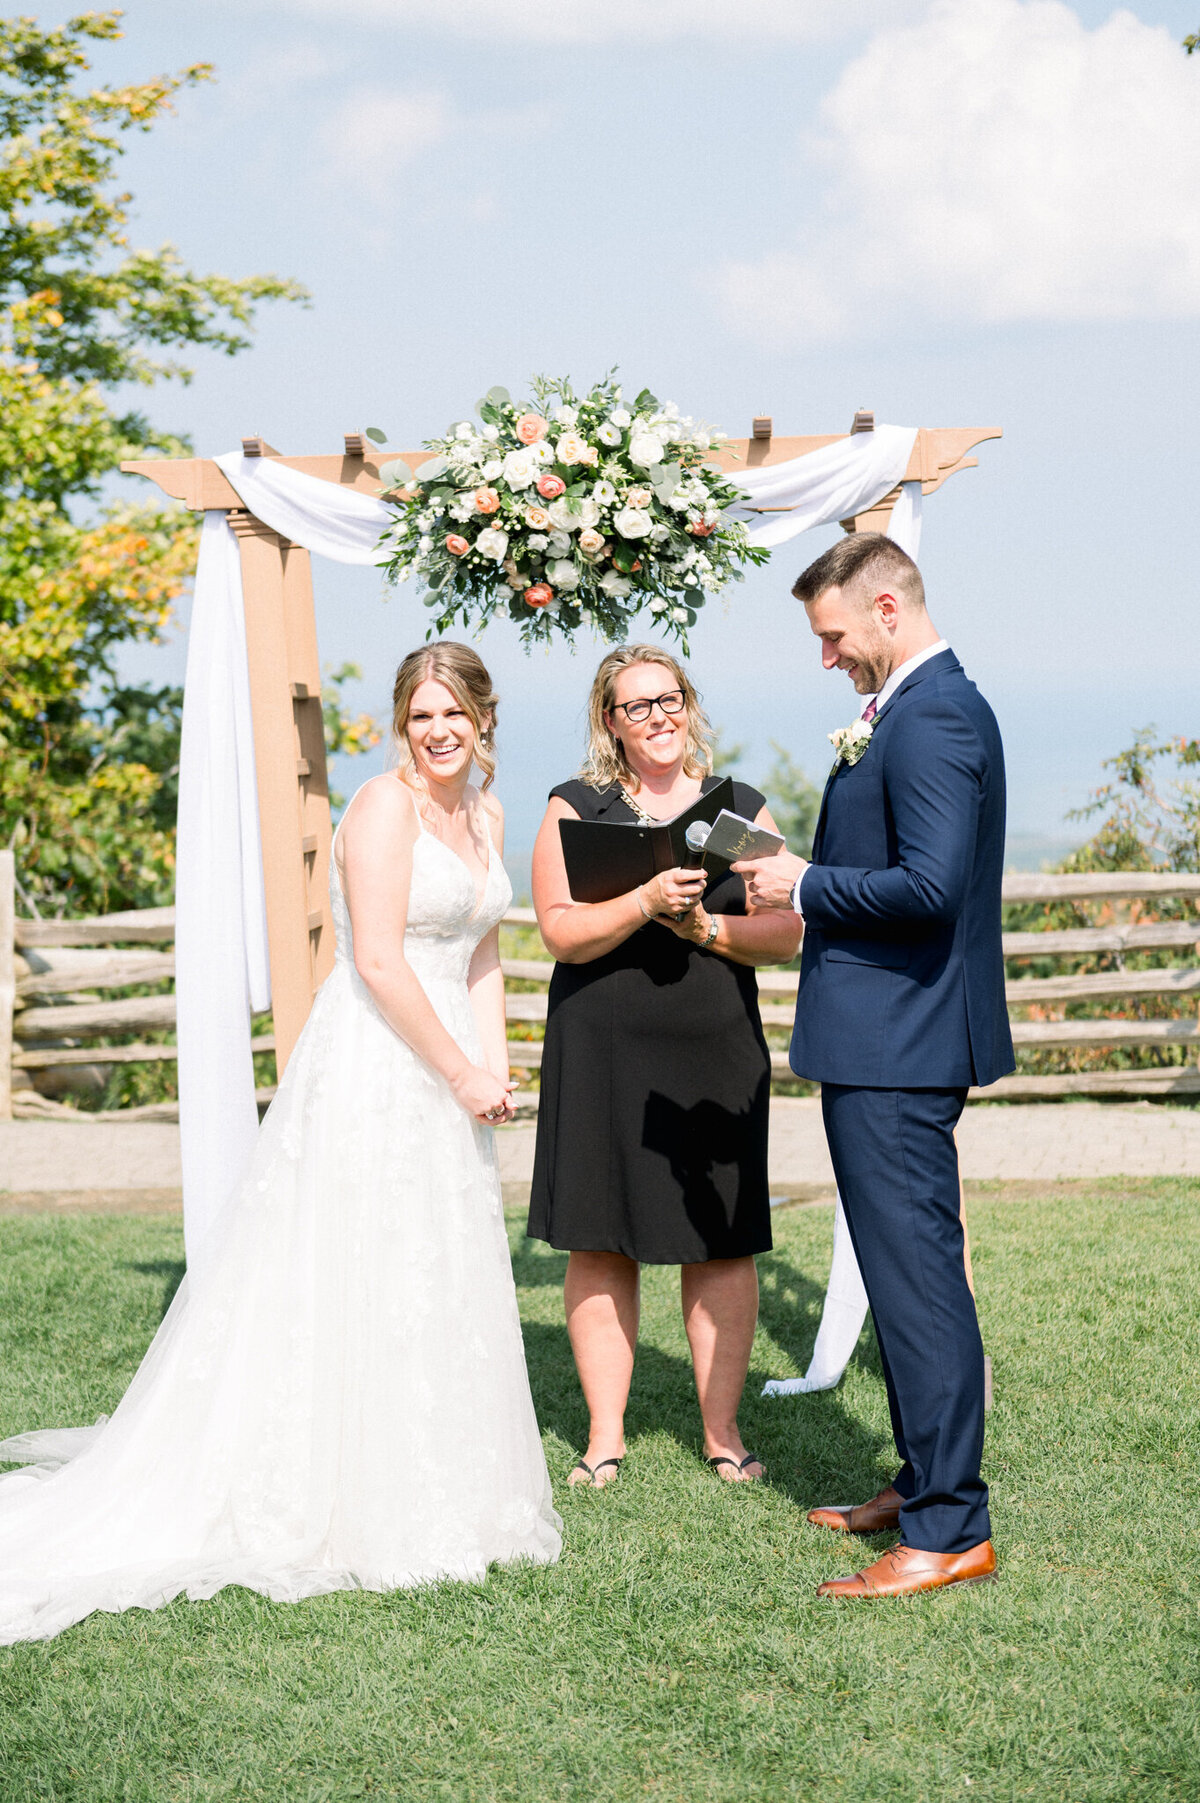 Bride and Groom reading vows at their outdoor wedding captured by Niagara wedding photographer